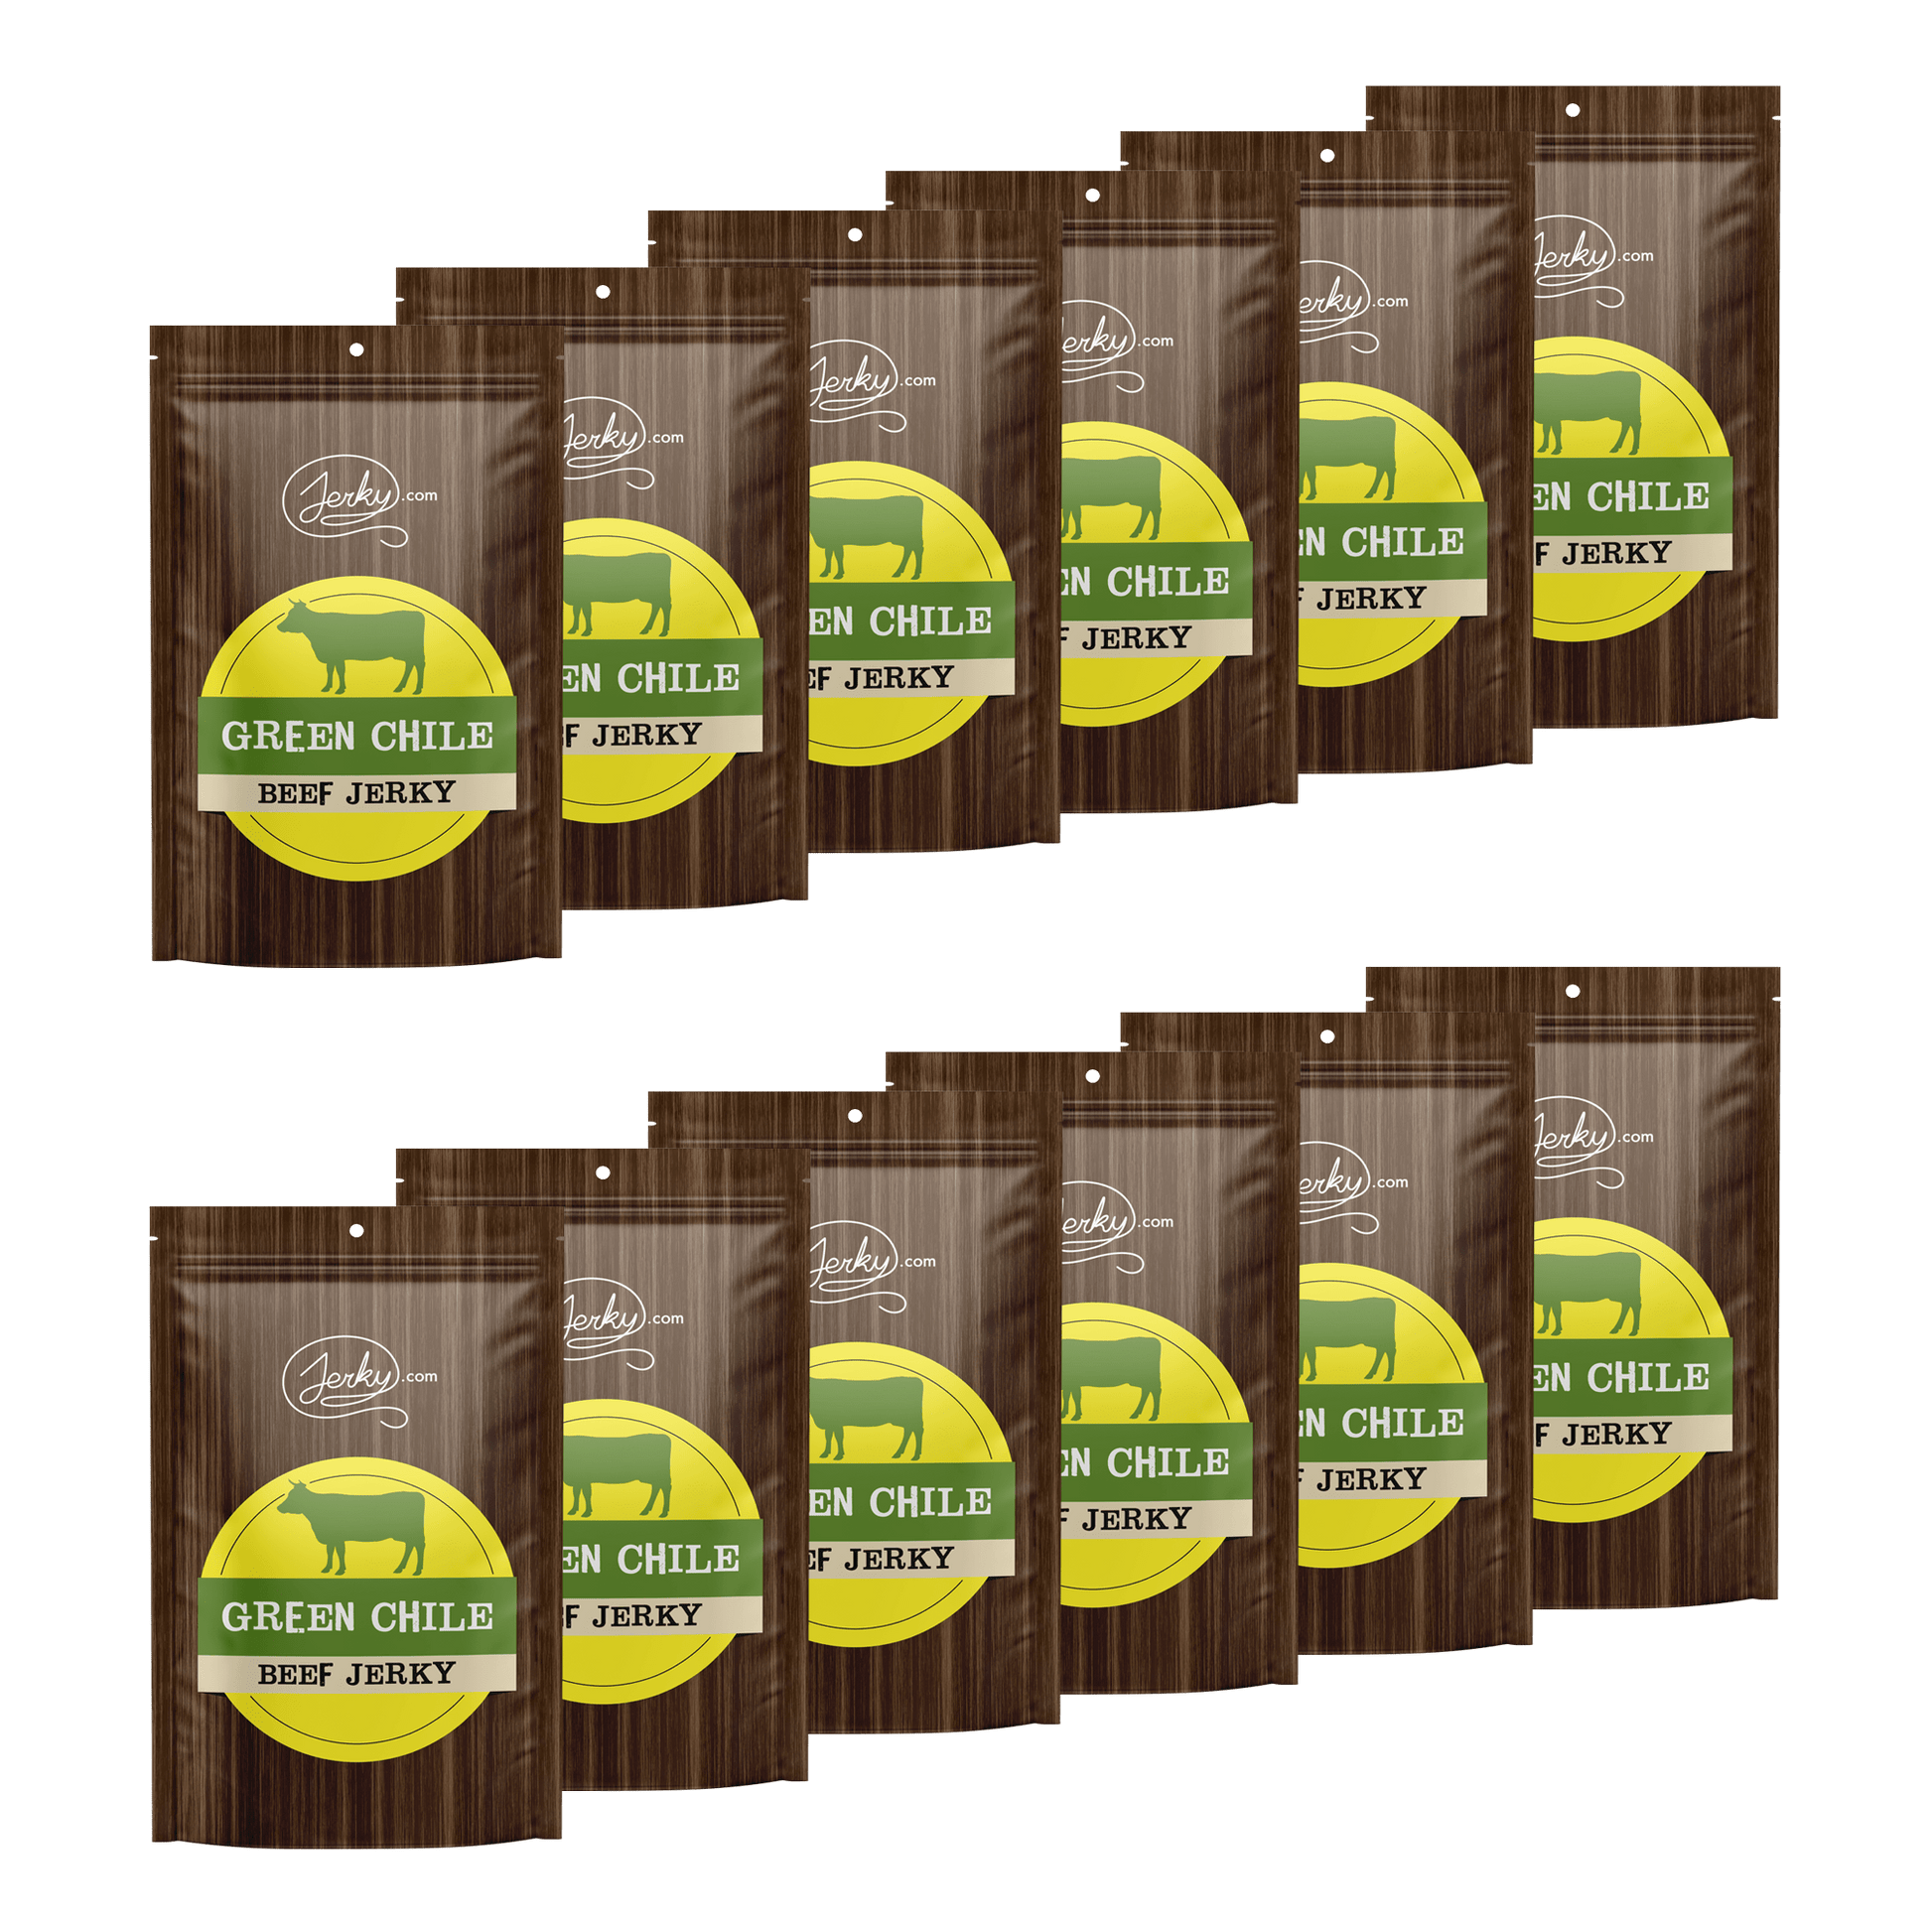 All-Natural Beef Jerky - Green Chile by Jerky.com